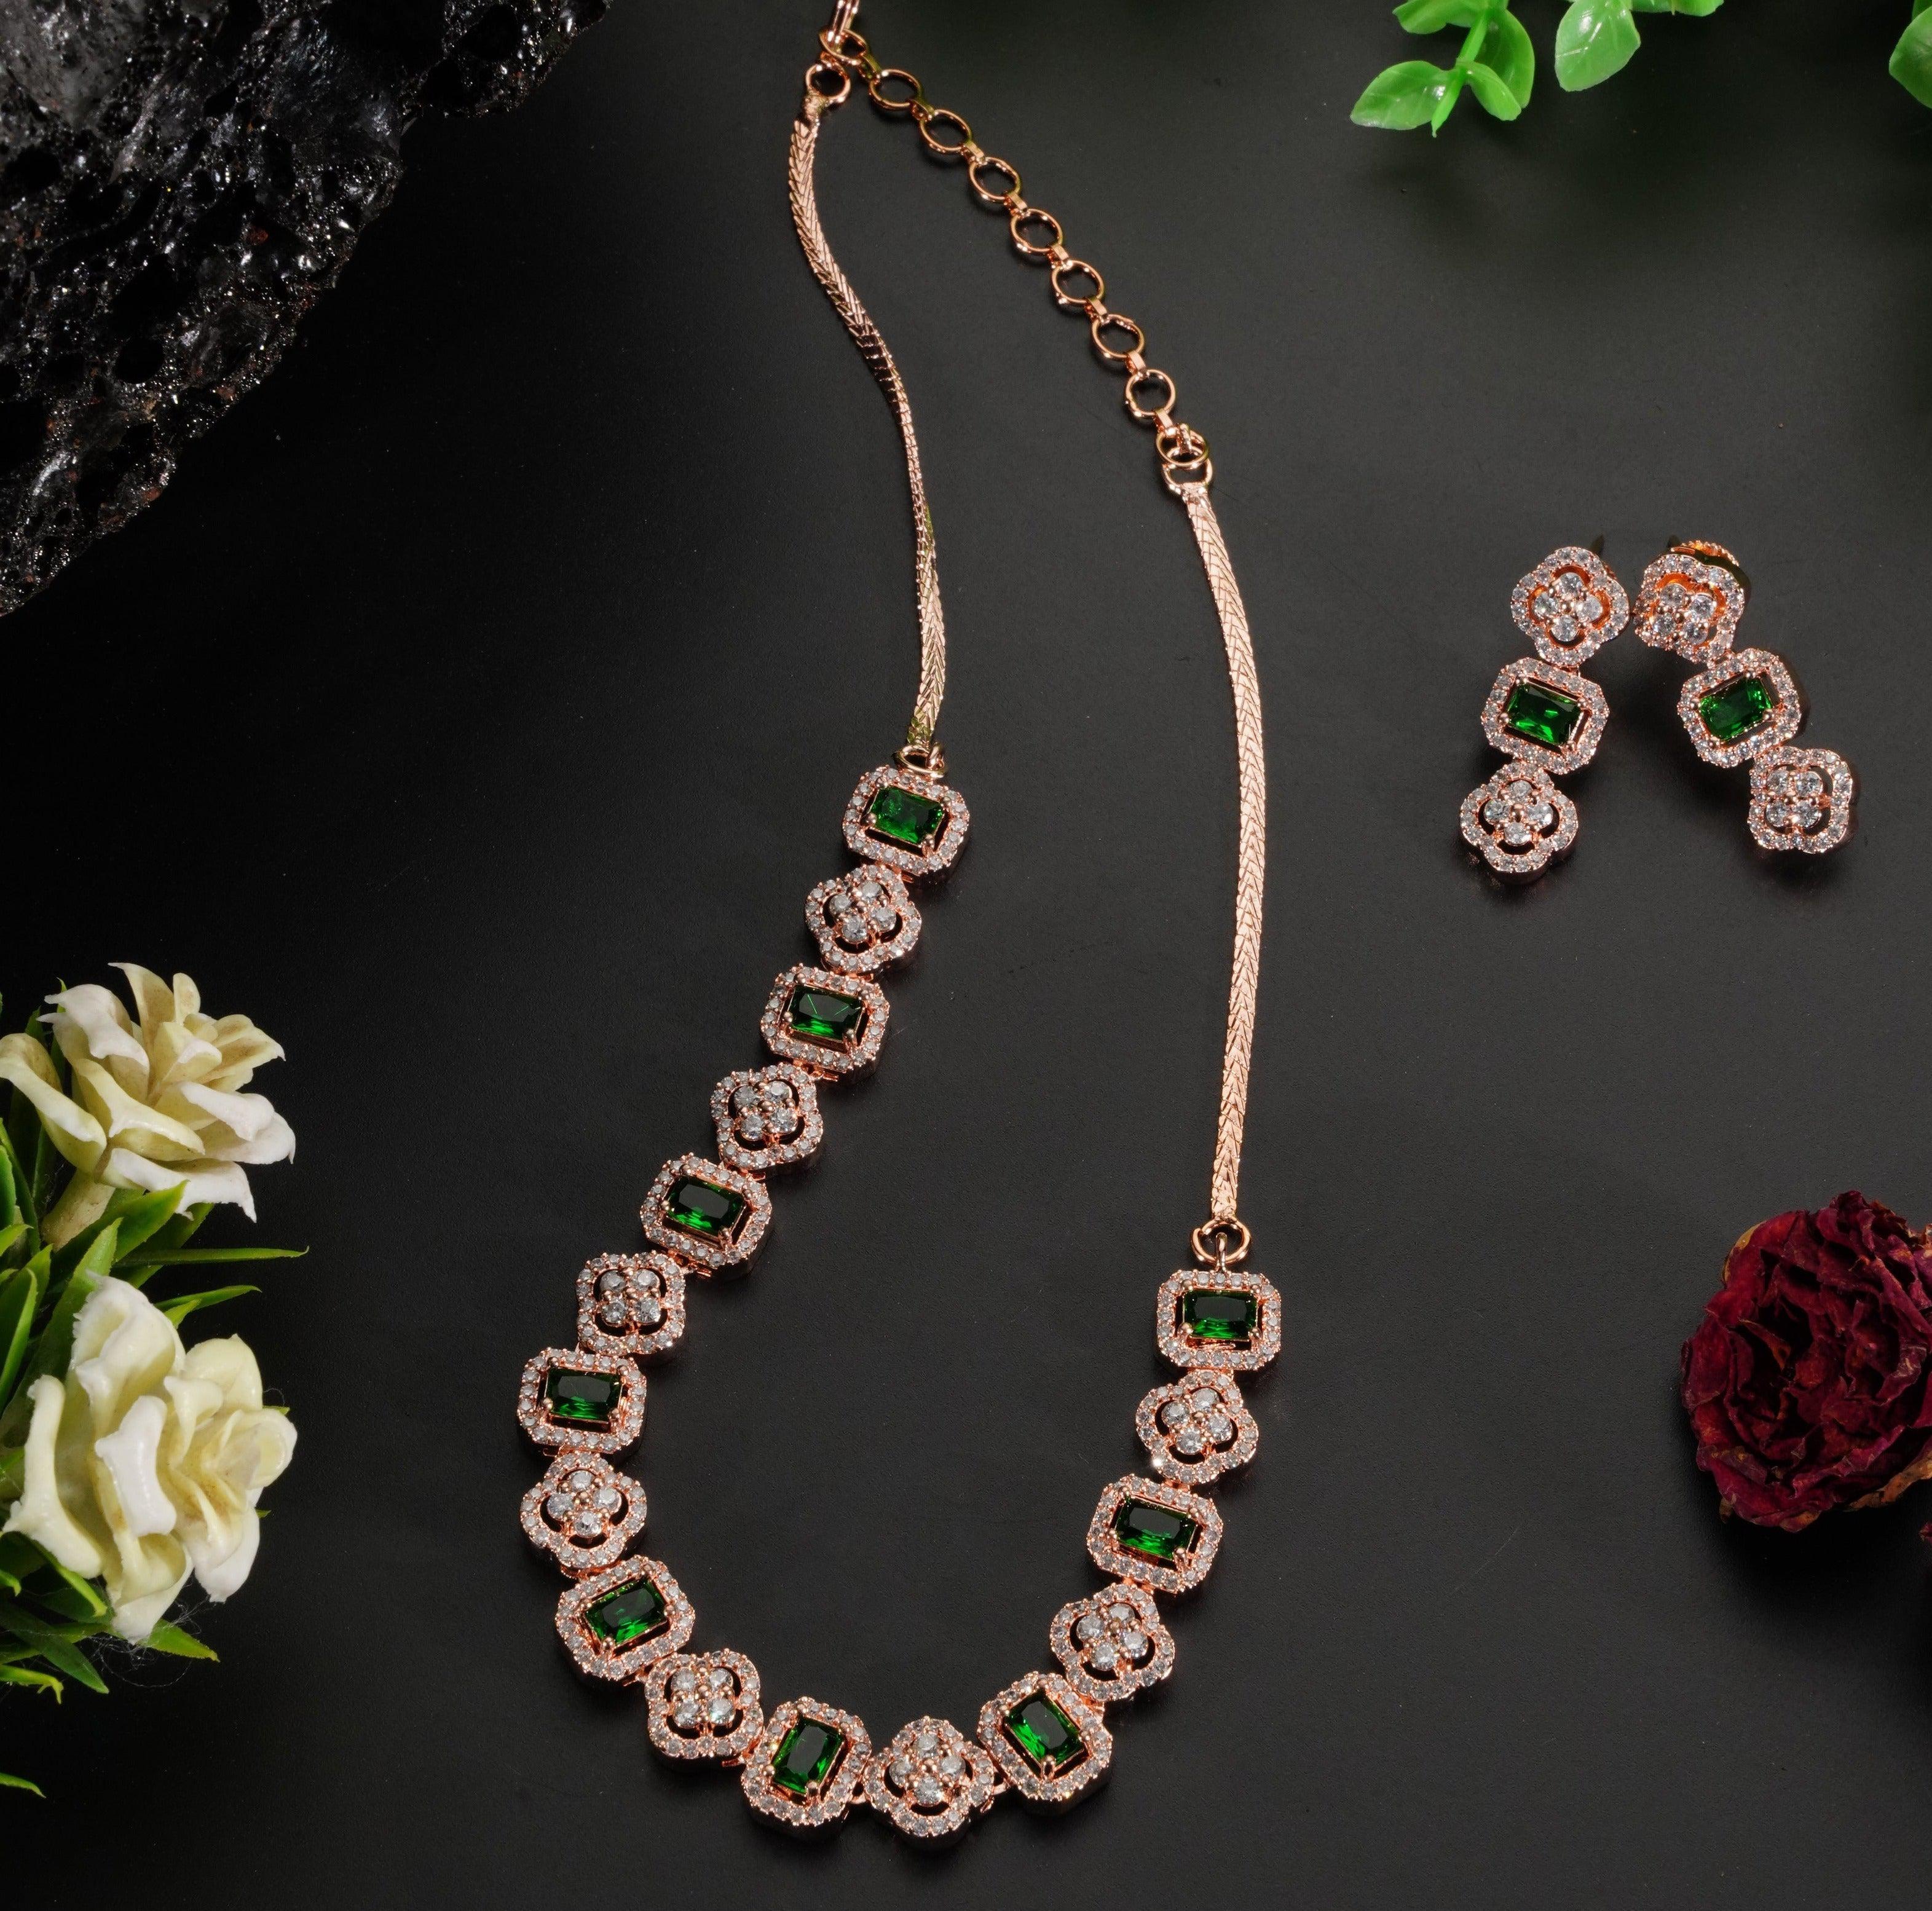 Premium Sayara Collection Rose Gold Plated Necklace set with Top quality CZ Stones 8816N